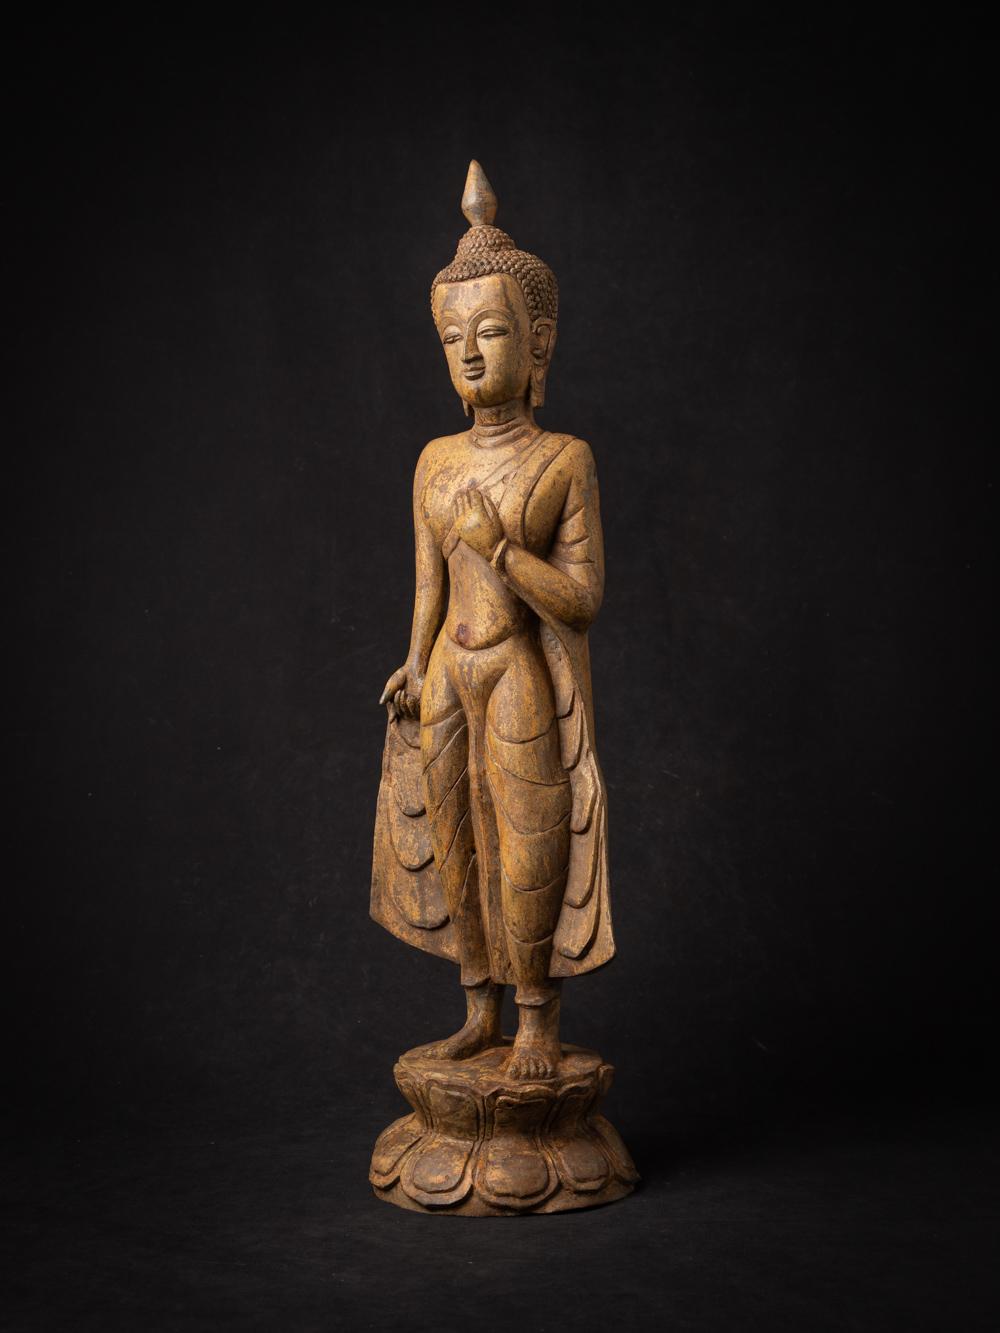 Material : bronze
60,8 cm high
17,7 cm wide and 14,1 cm deep
Middle 20th century
Weight: 6,74 kgs
Originating from Burma
Nr: X-23-2